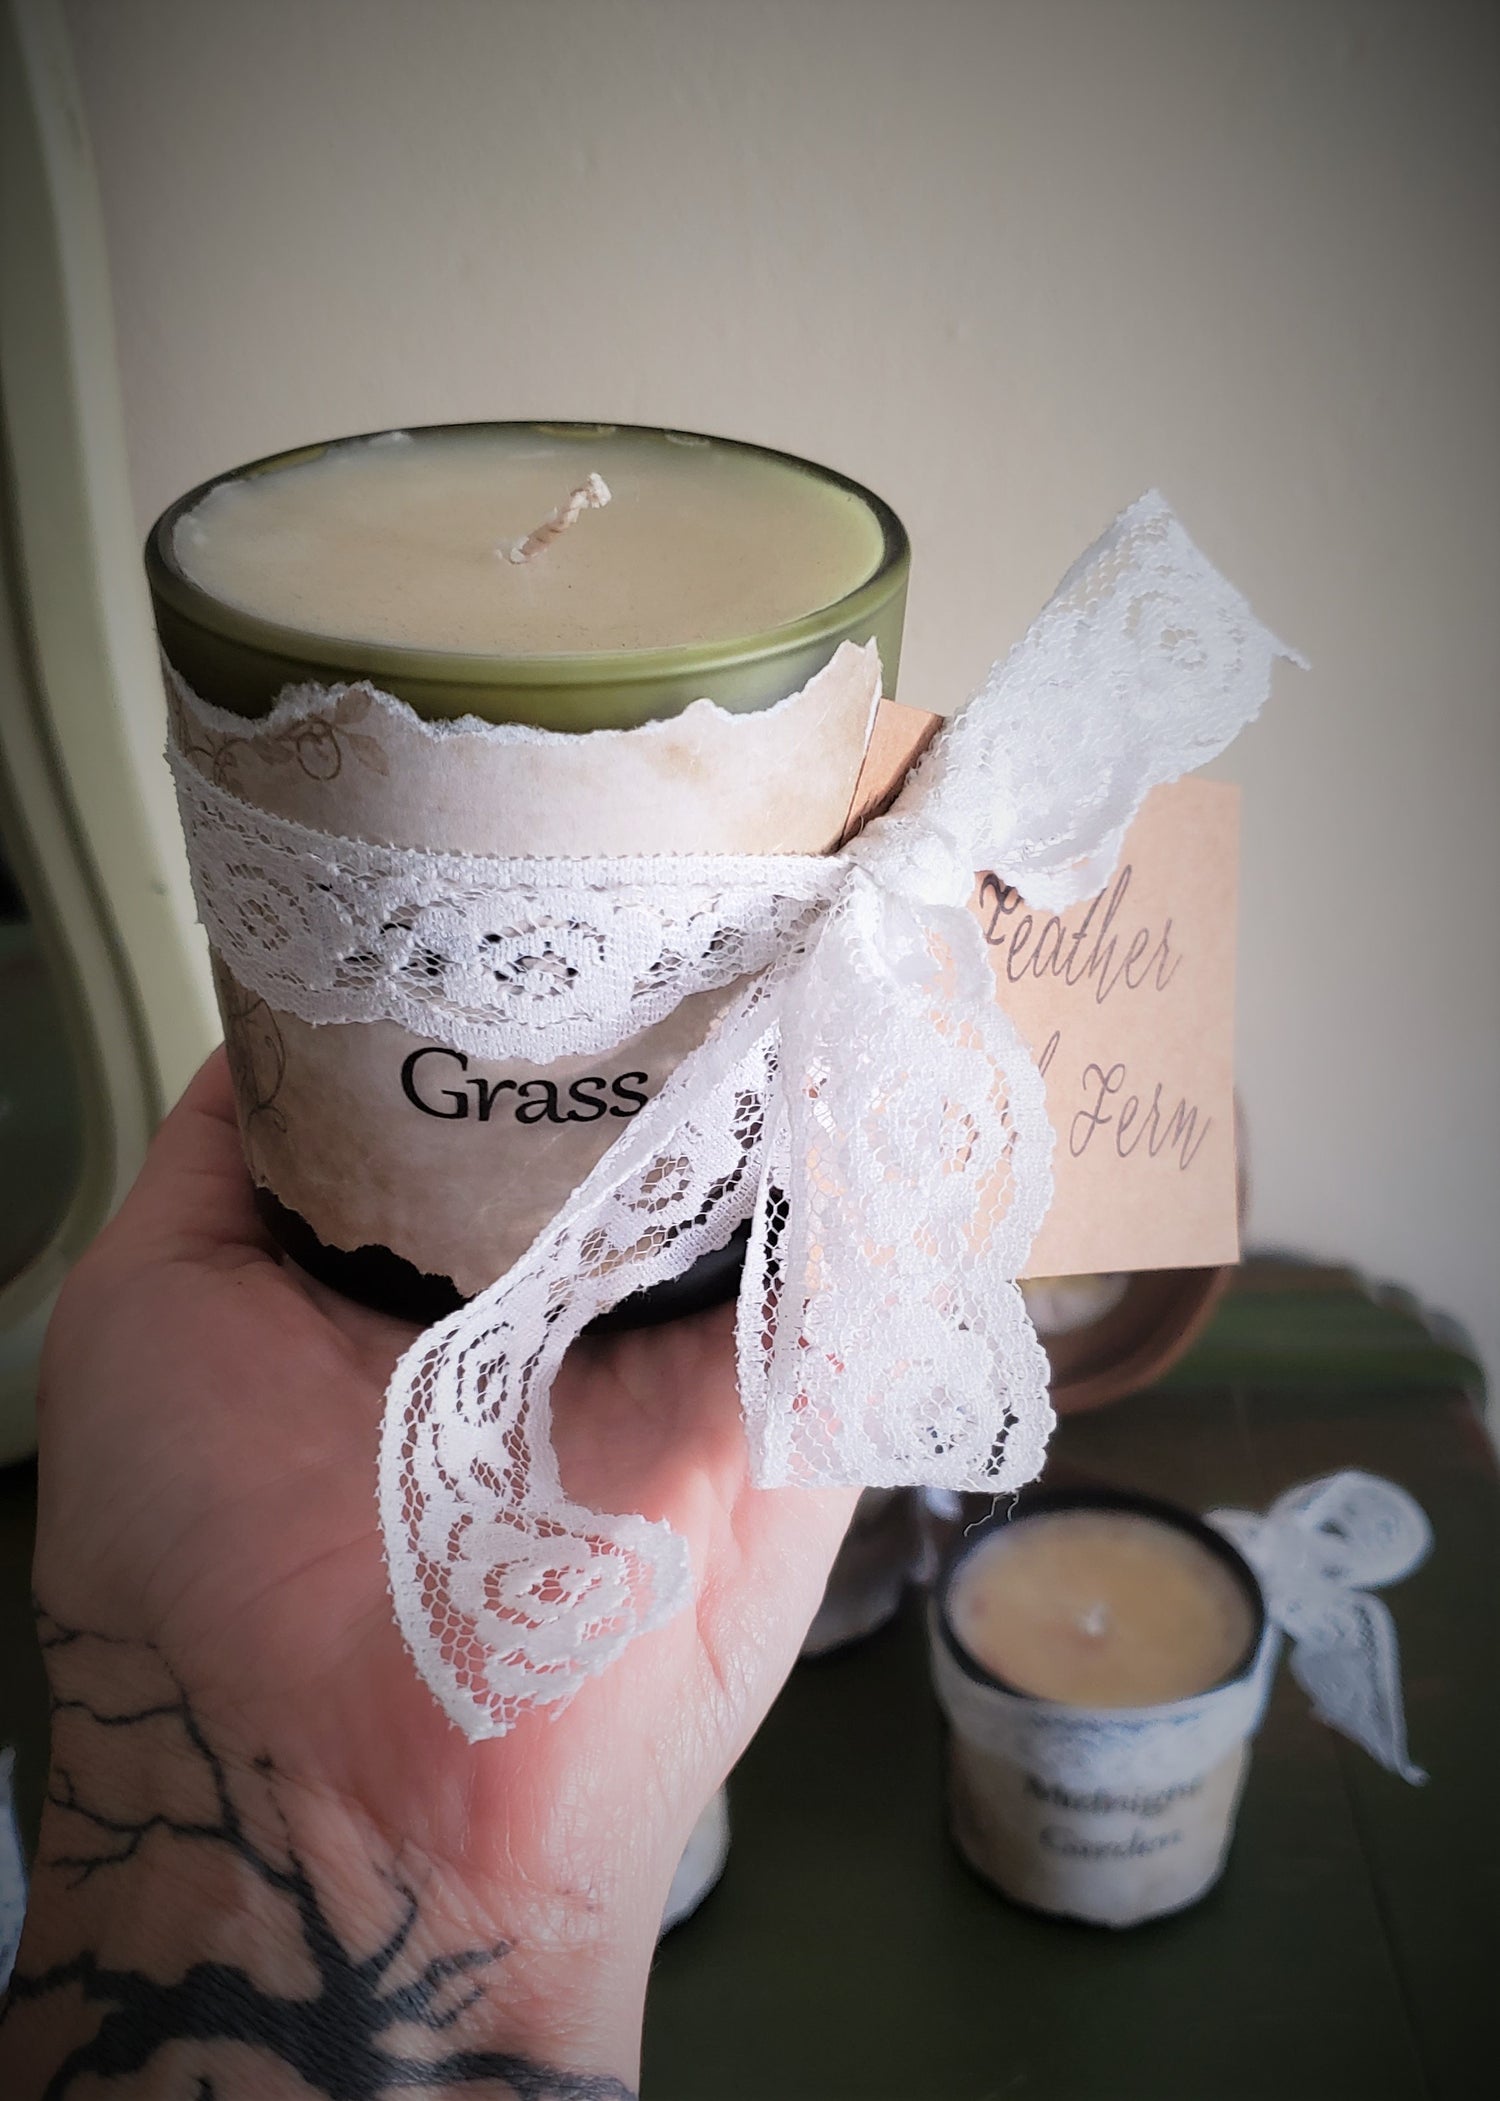 "Cemetary Grass" Soy Candle With Hand Torn Label, Lynden Blossom